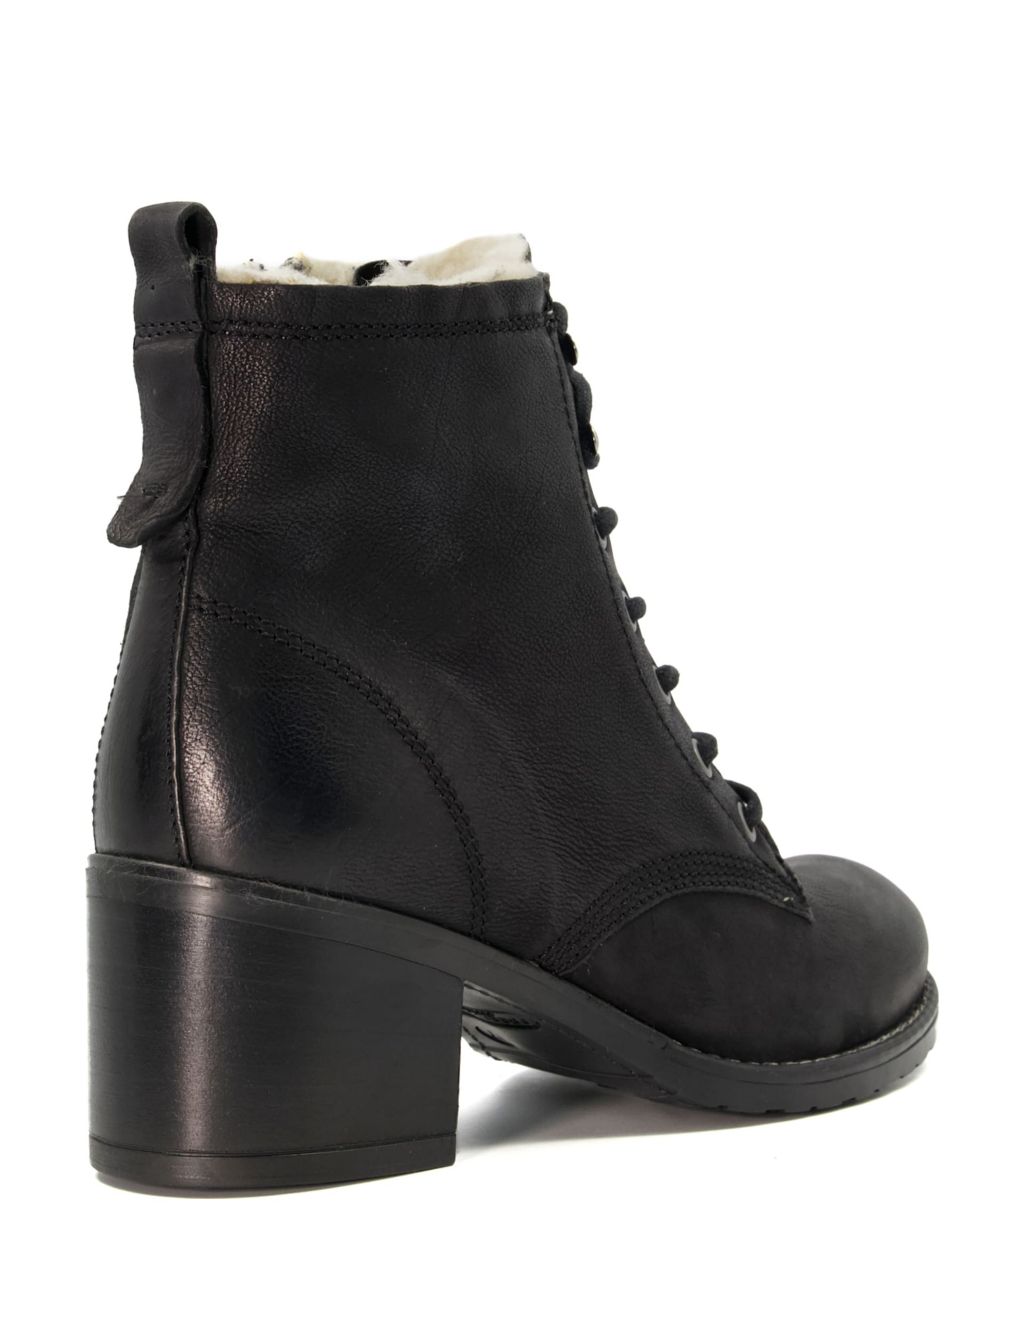 Leather Lace Up Block Heel Ankle Boots image 4